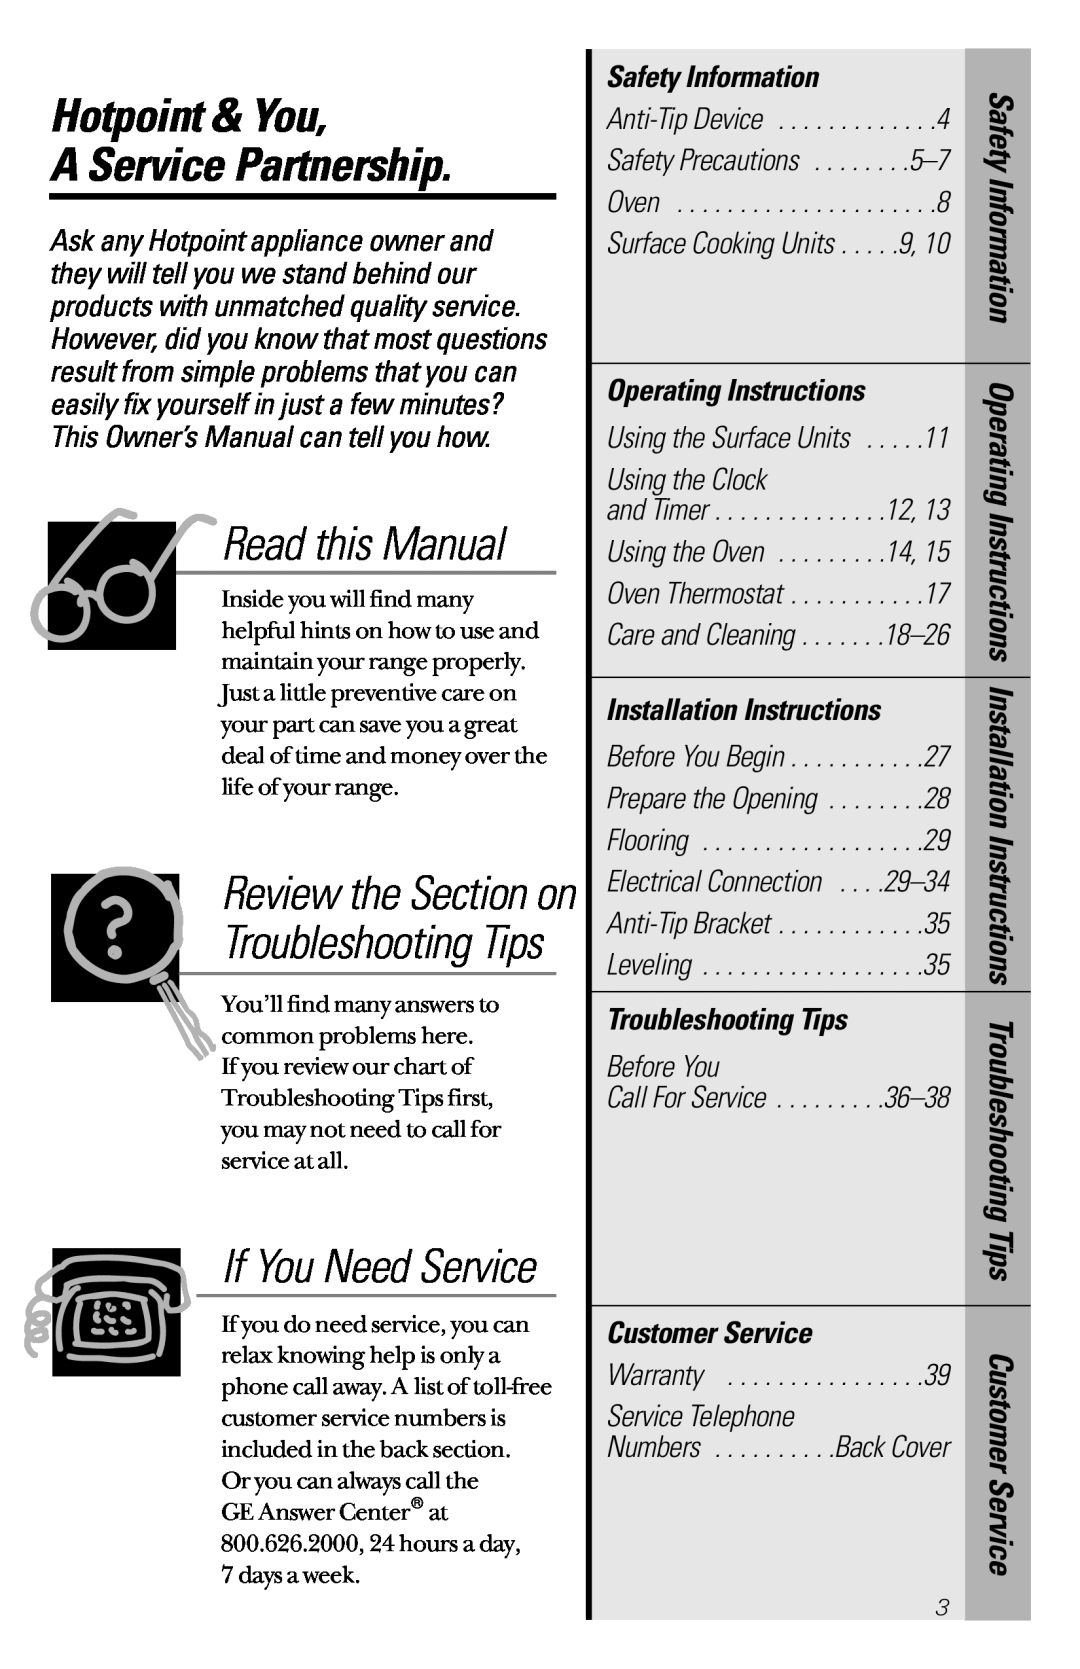 Hotpoint RB632, RB533 Hotpoint & You A Service Partnership, Read this Manual, Review the Section on, Troubleshooting Tips 